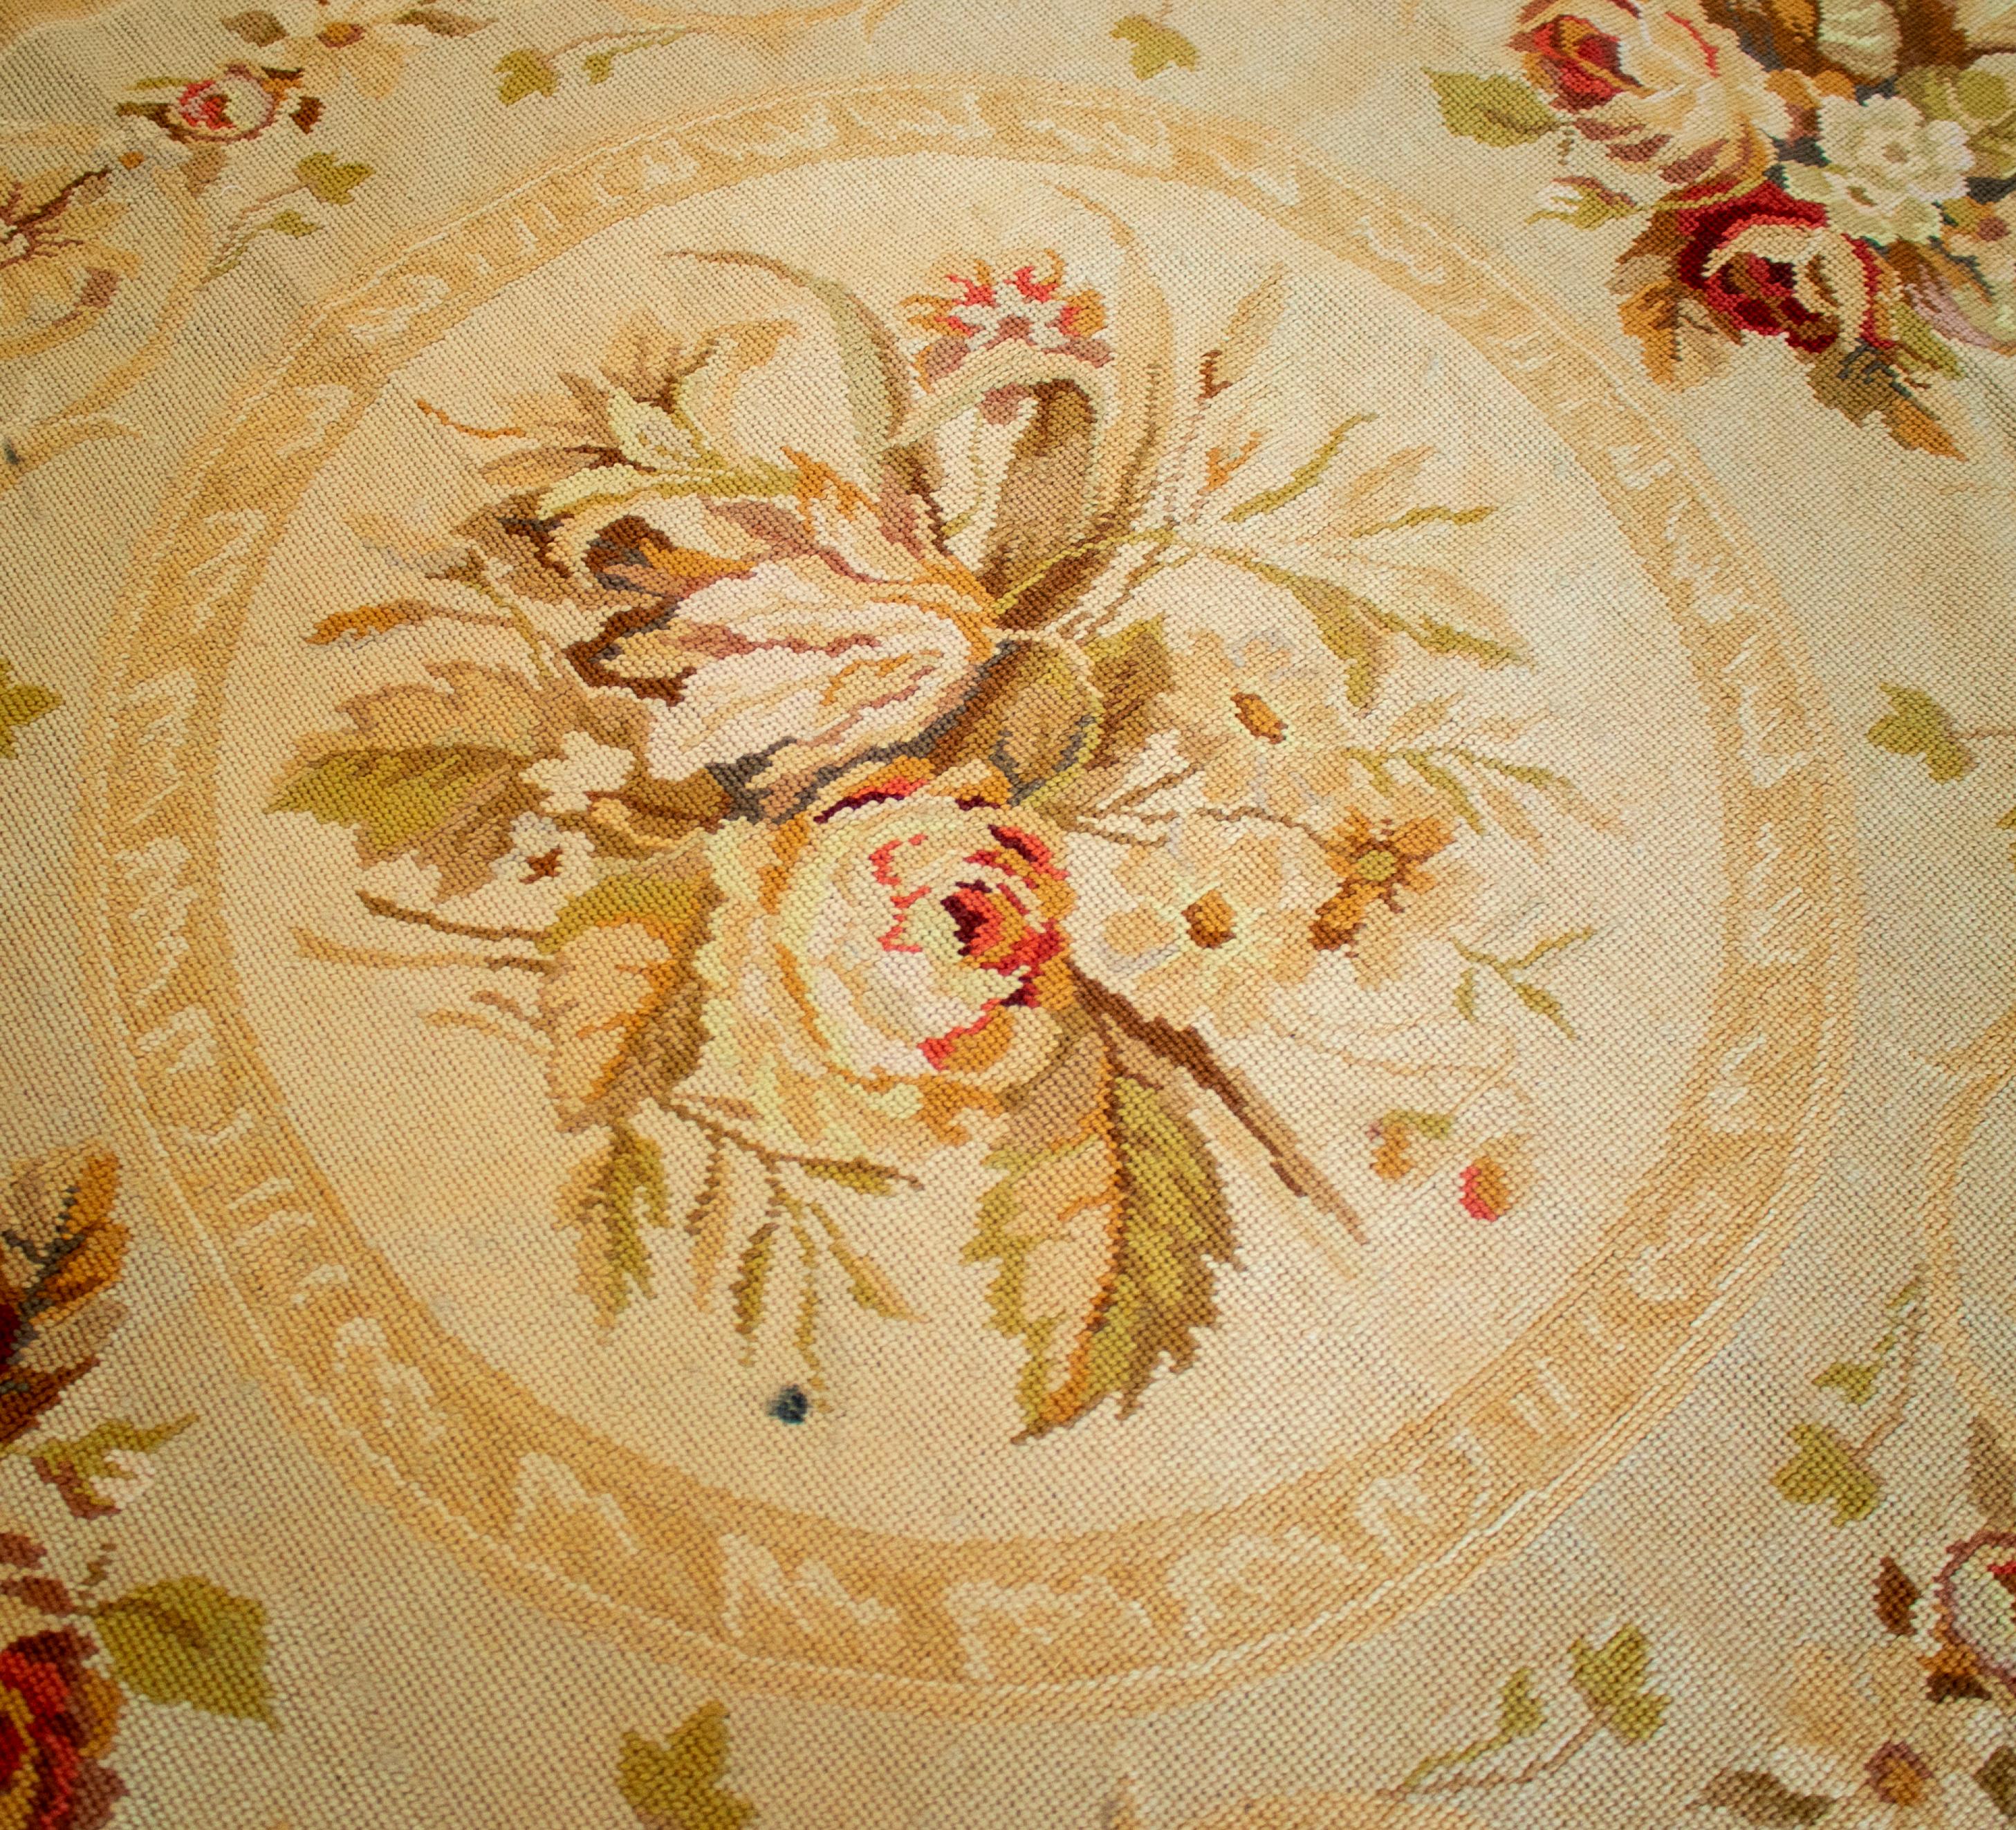 20th Century 1950s French Carpet with Ochre Tones and Flower Decorations For Sale